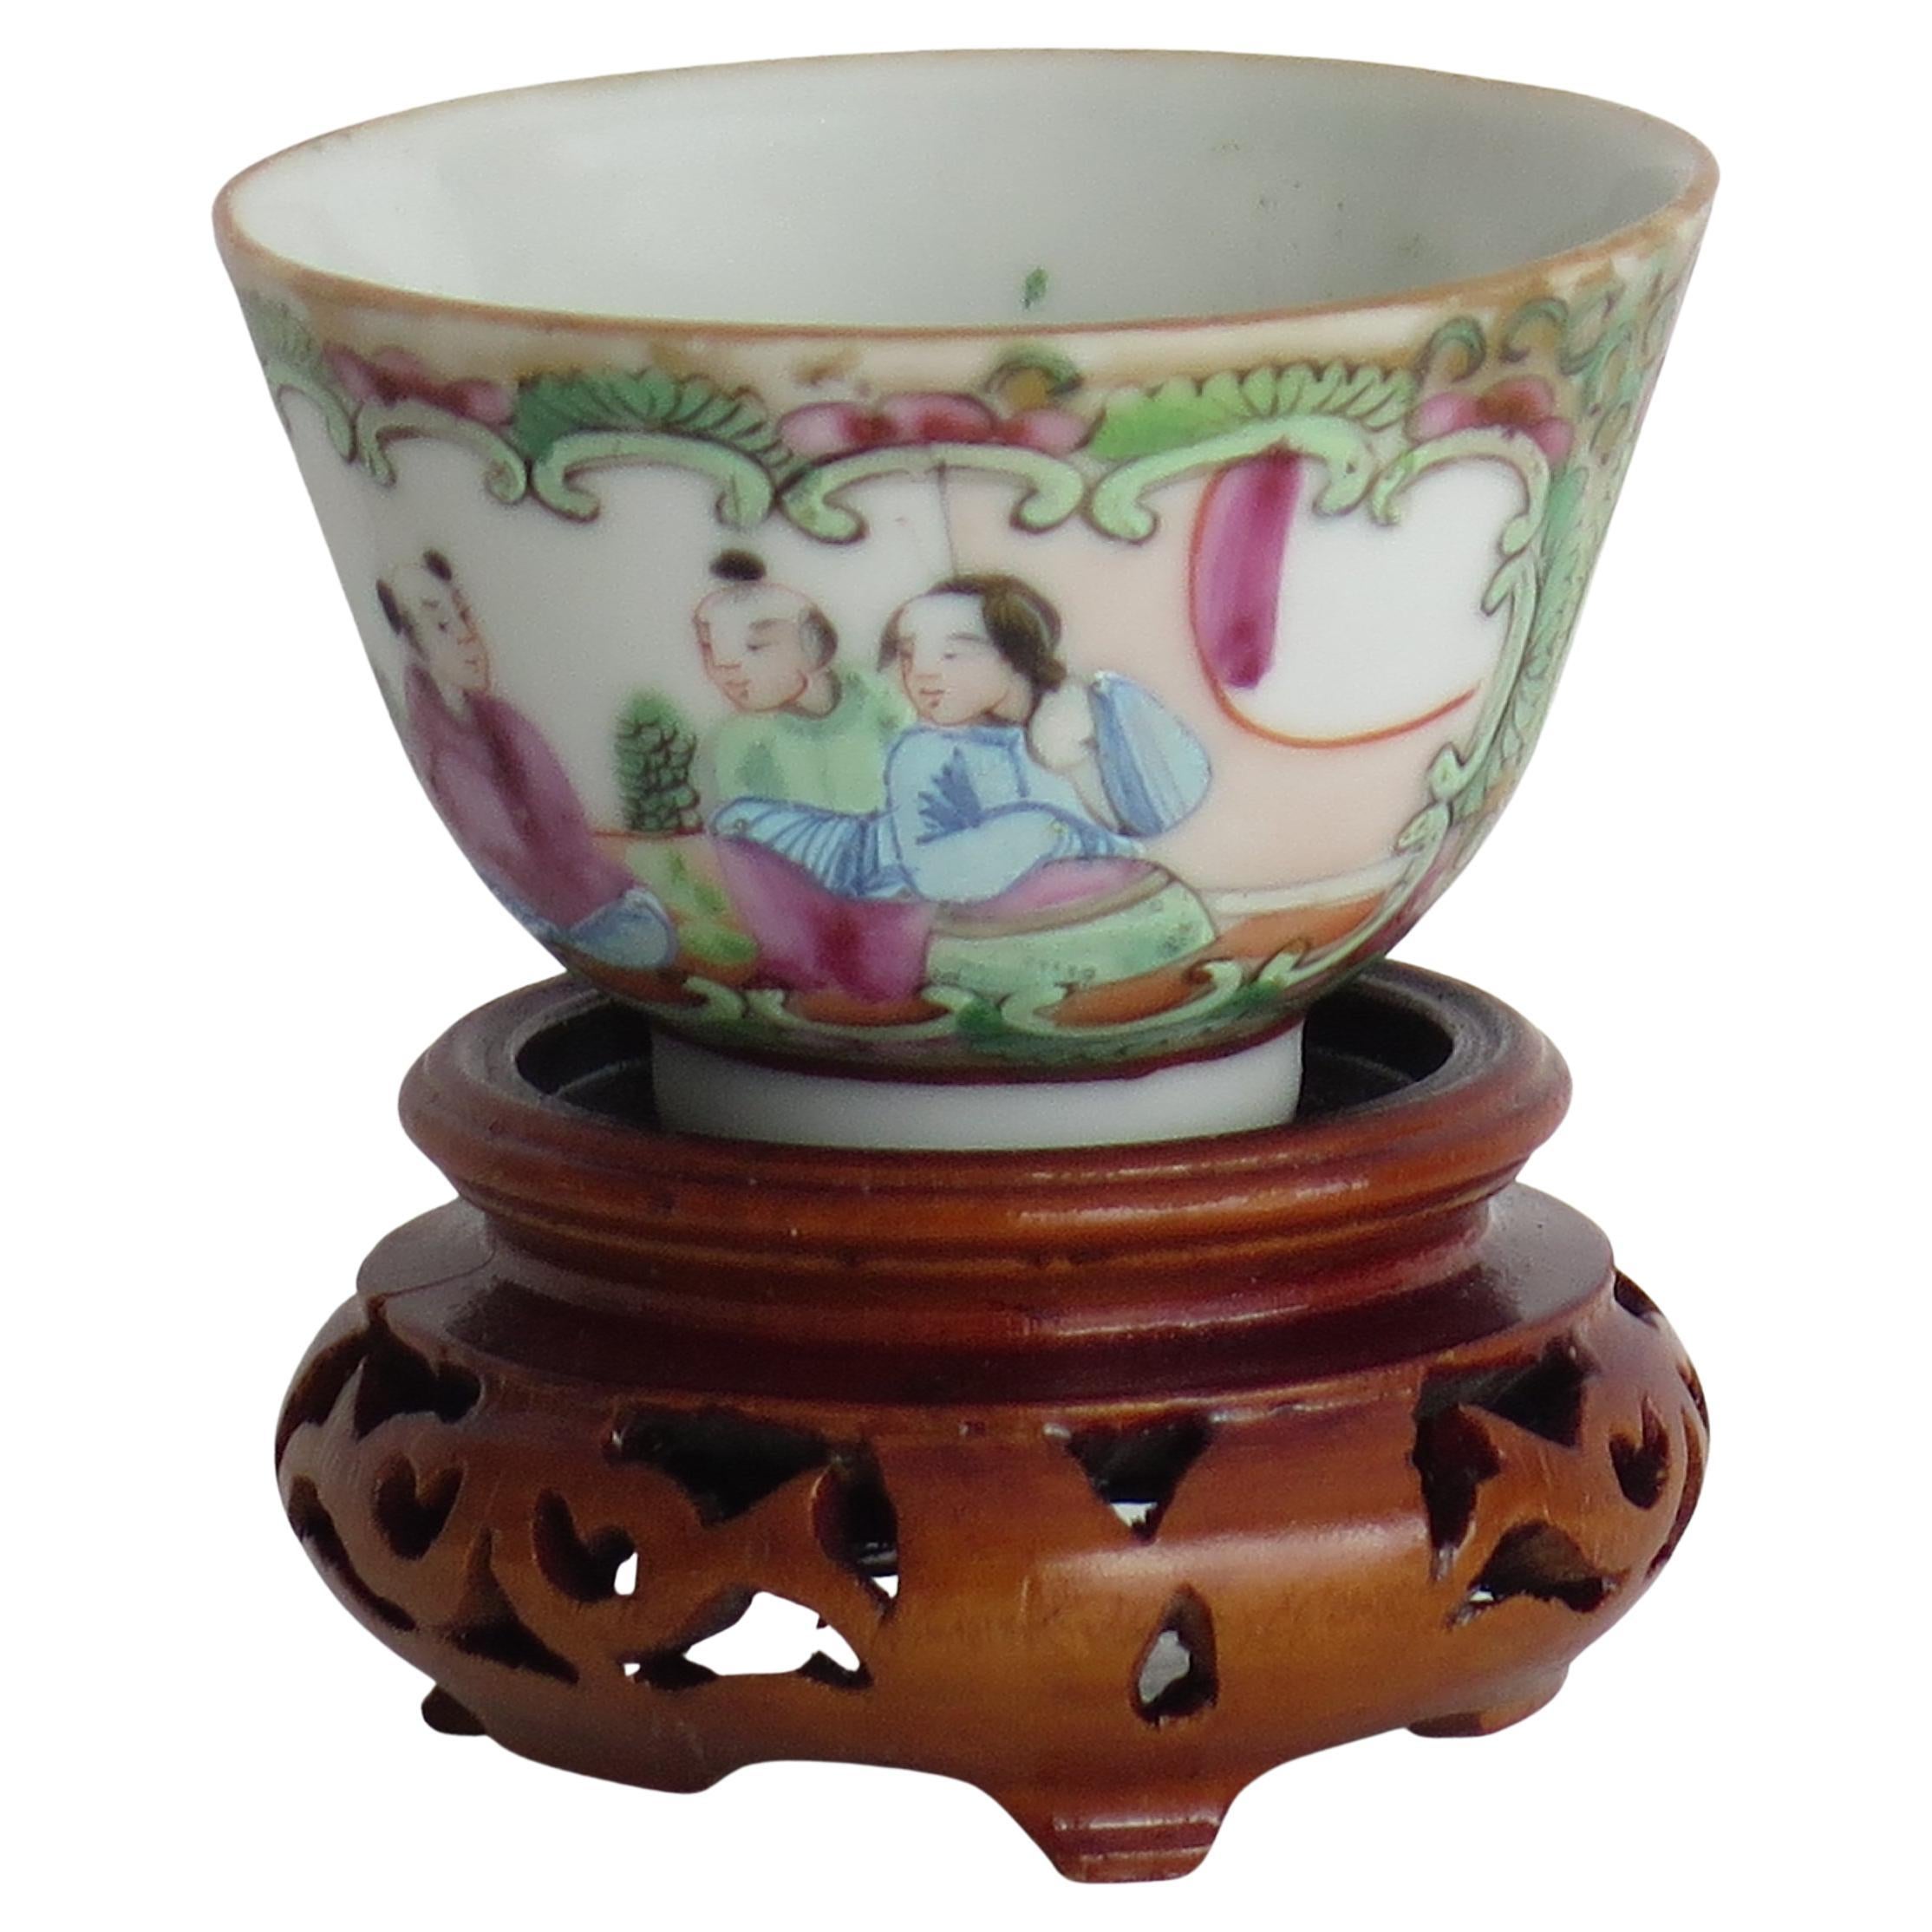 This is a fairly small Chinese Export Tea Bowl, all hand decorated in the Canton Famille Rose Medallion pattern and comes complete wit a carved hardwood stand, all dating to the early 19th Century of the Qing period, Circa 1830.

Chinese Rose